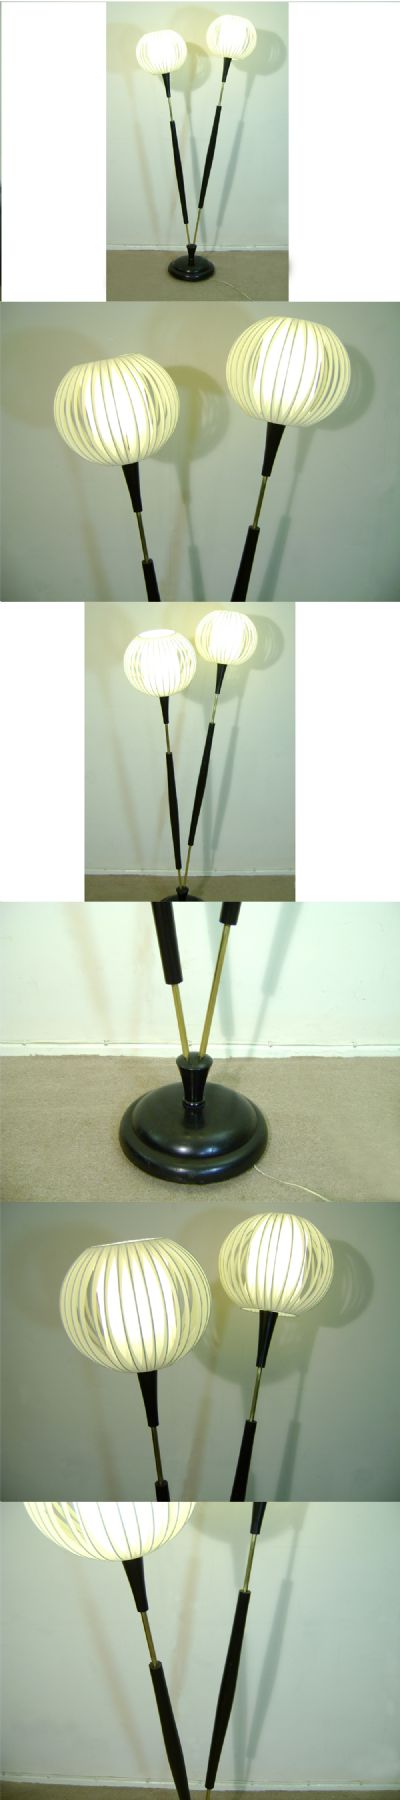 A  highly unusual double stem floor lamp, c1950/60s. Of Ebonised wood with brass fittings and distinctive shades.